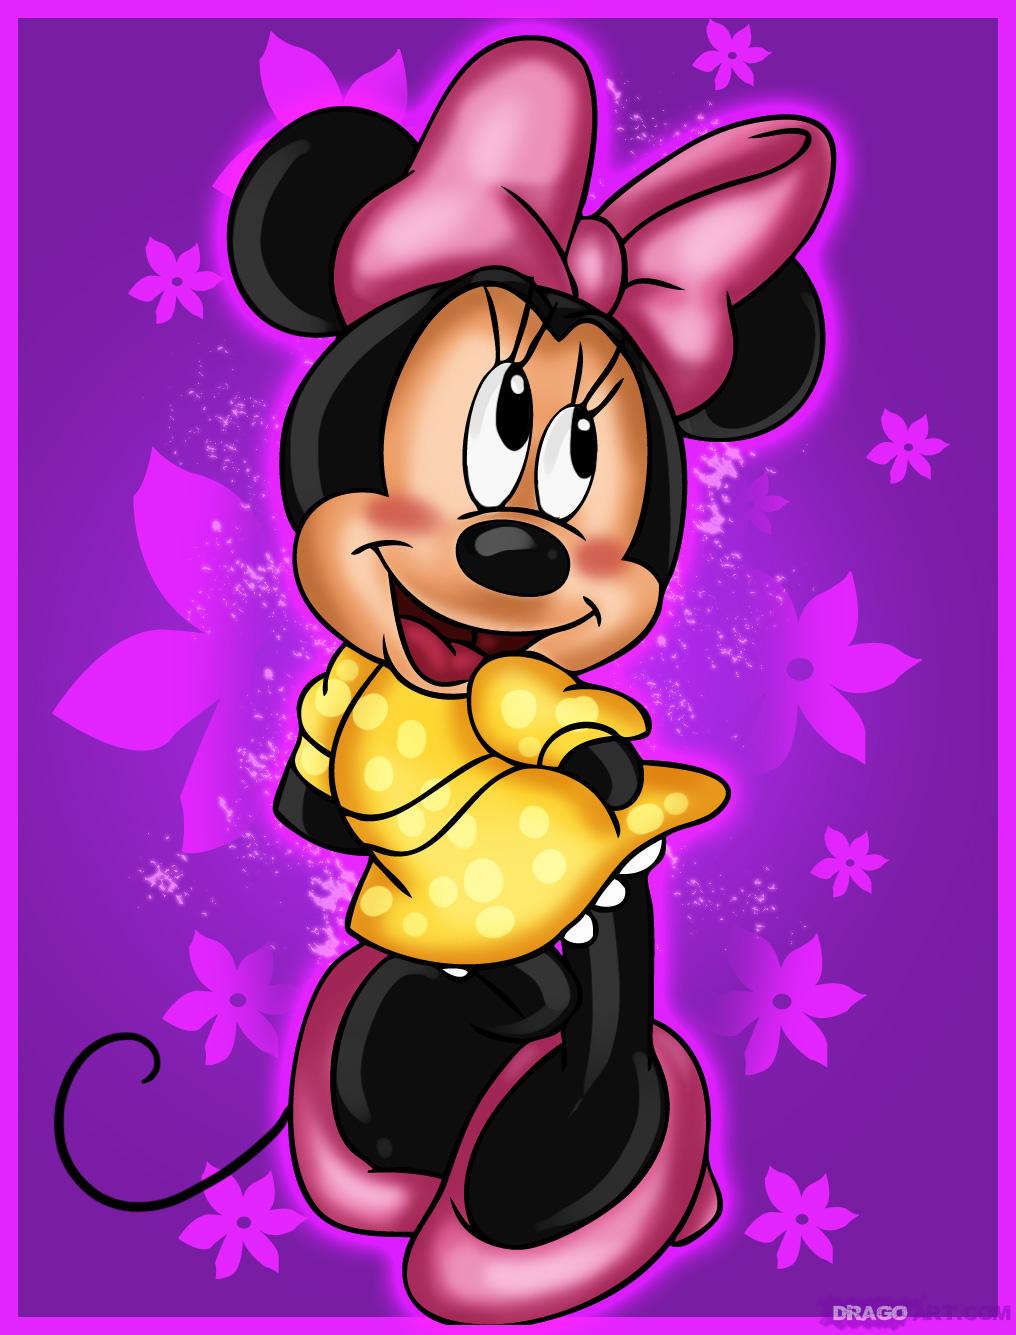 Minnie Mouse Cartoon Full HD Image Wallpaper for Galaxy Note